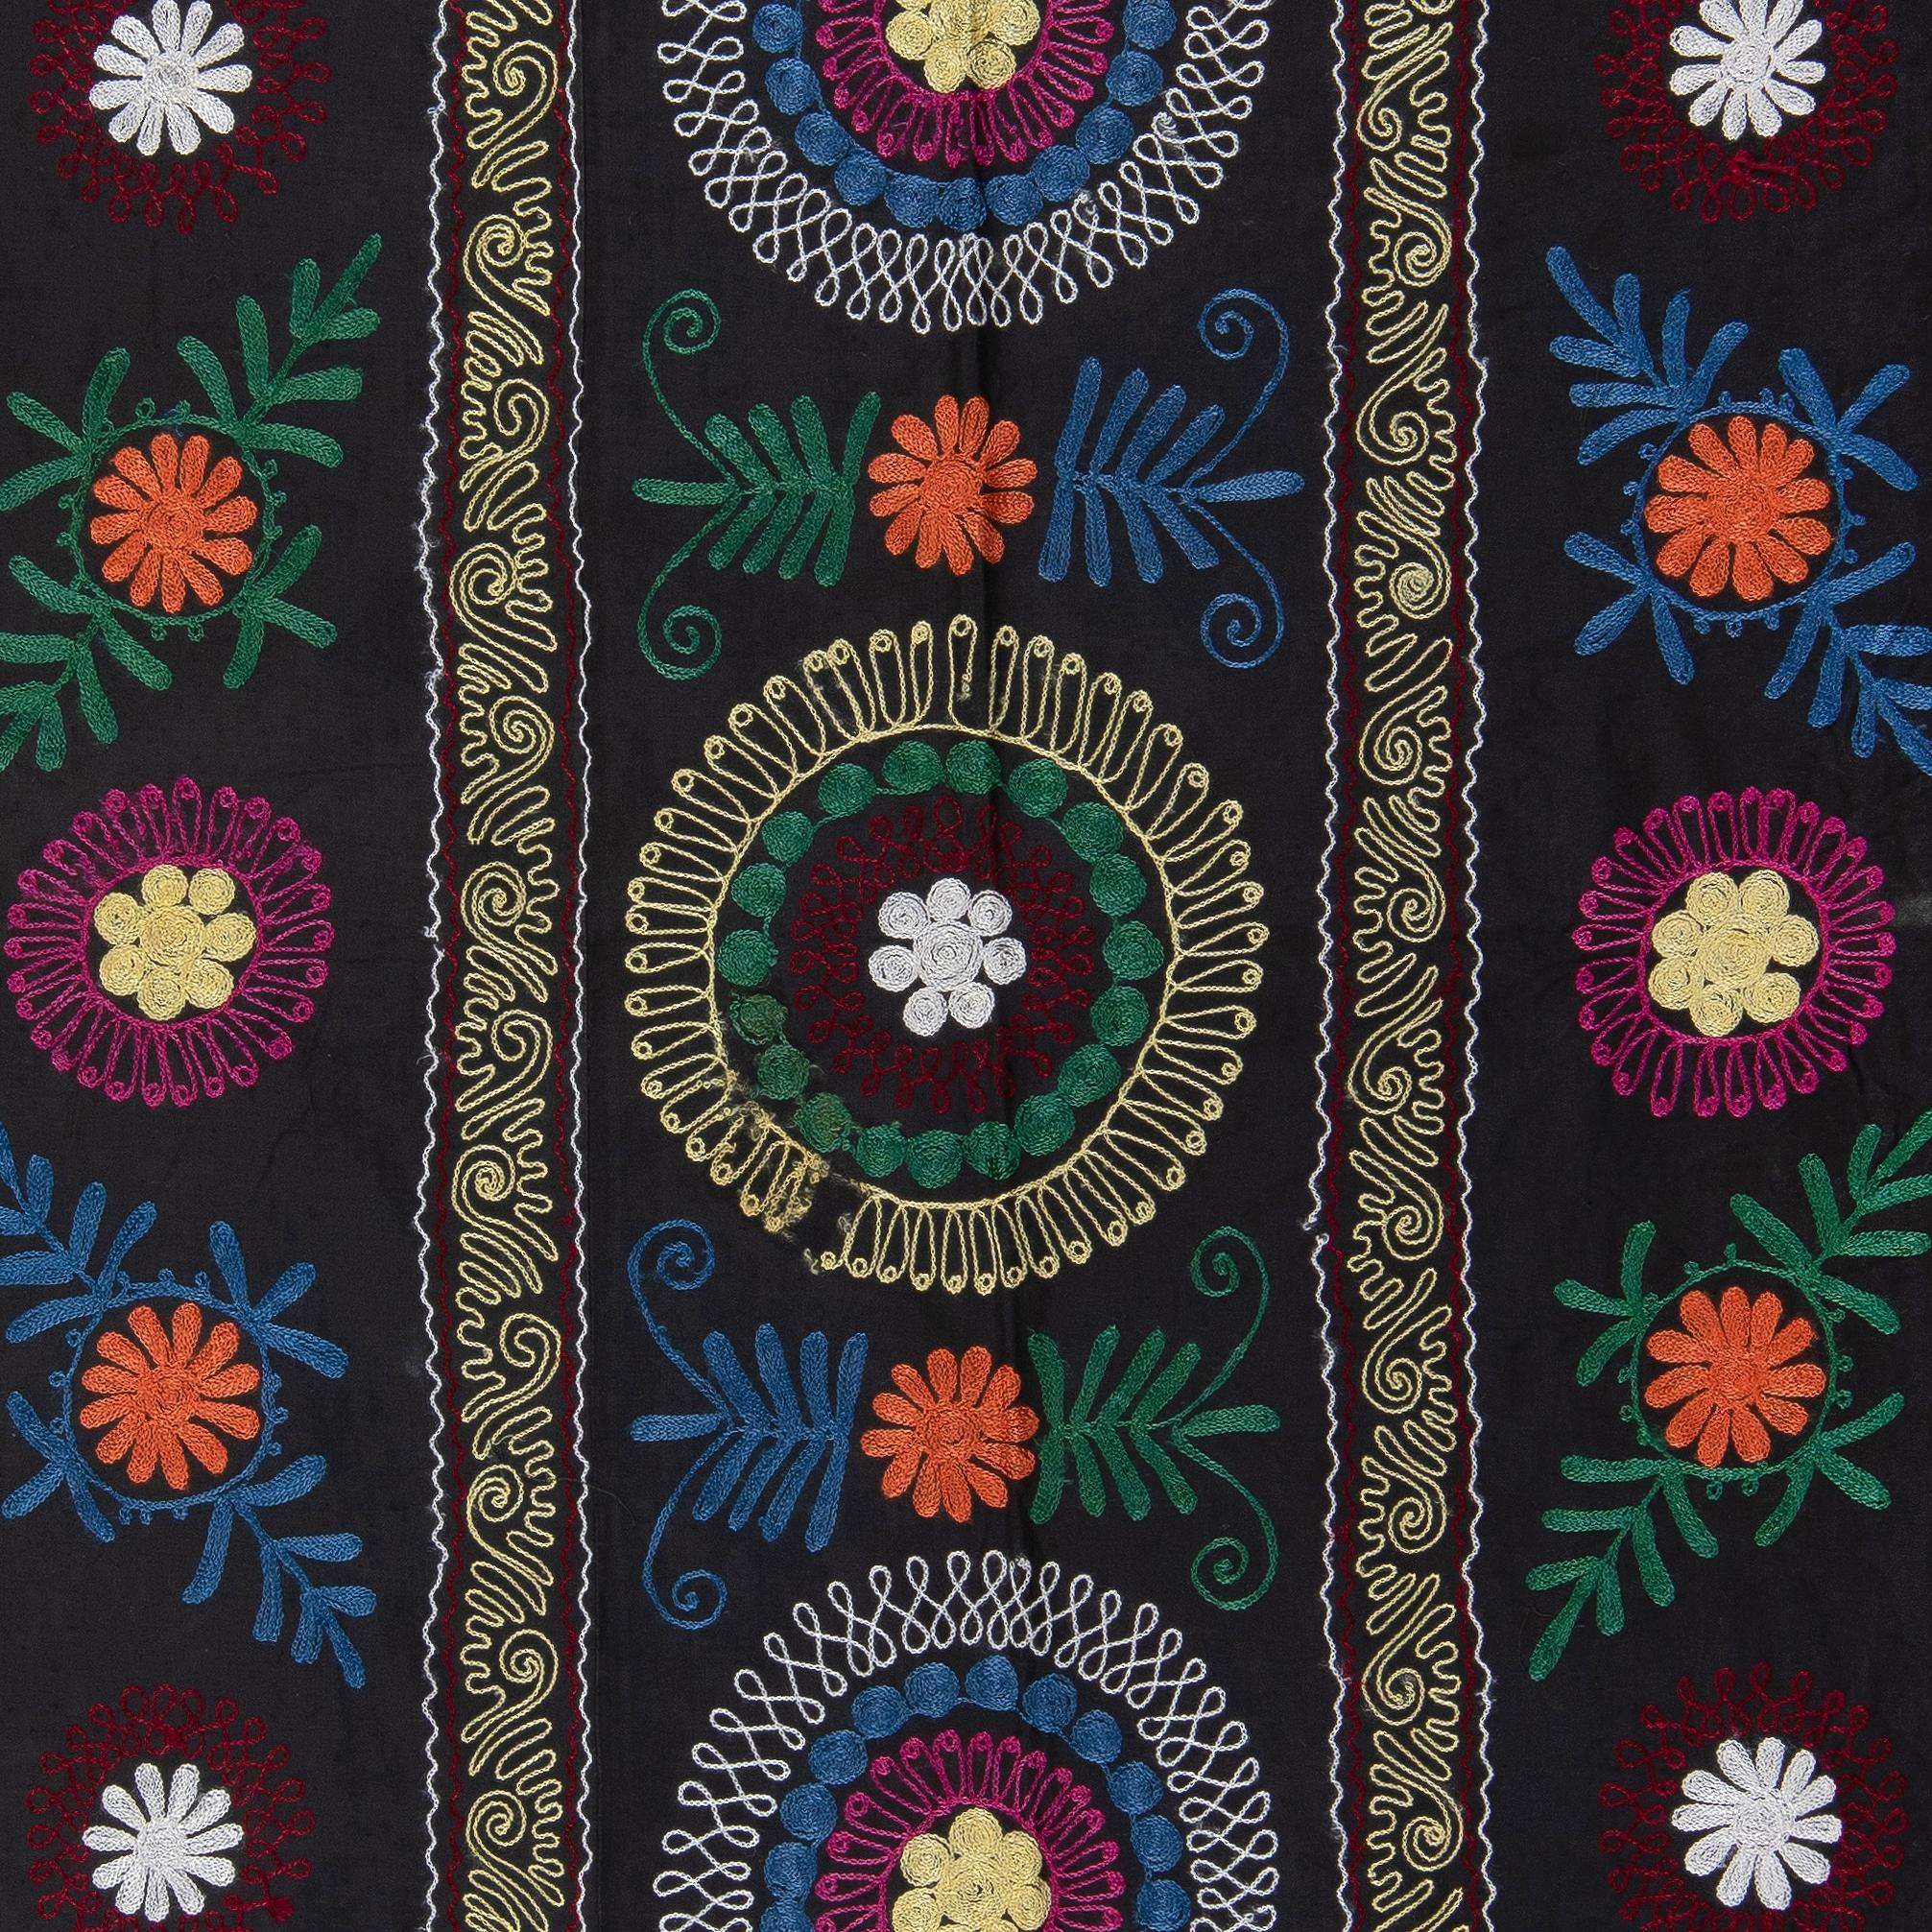 Embroidered 3.7x6.3 Ft Uzbek Suzani Wall Hanging in Black, Vintage Silk Embroidery Bedspread For Sale